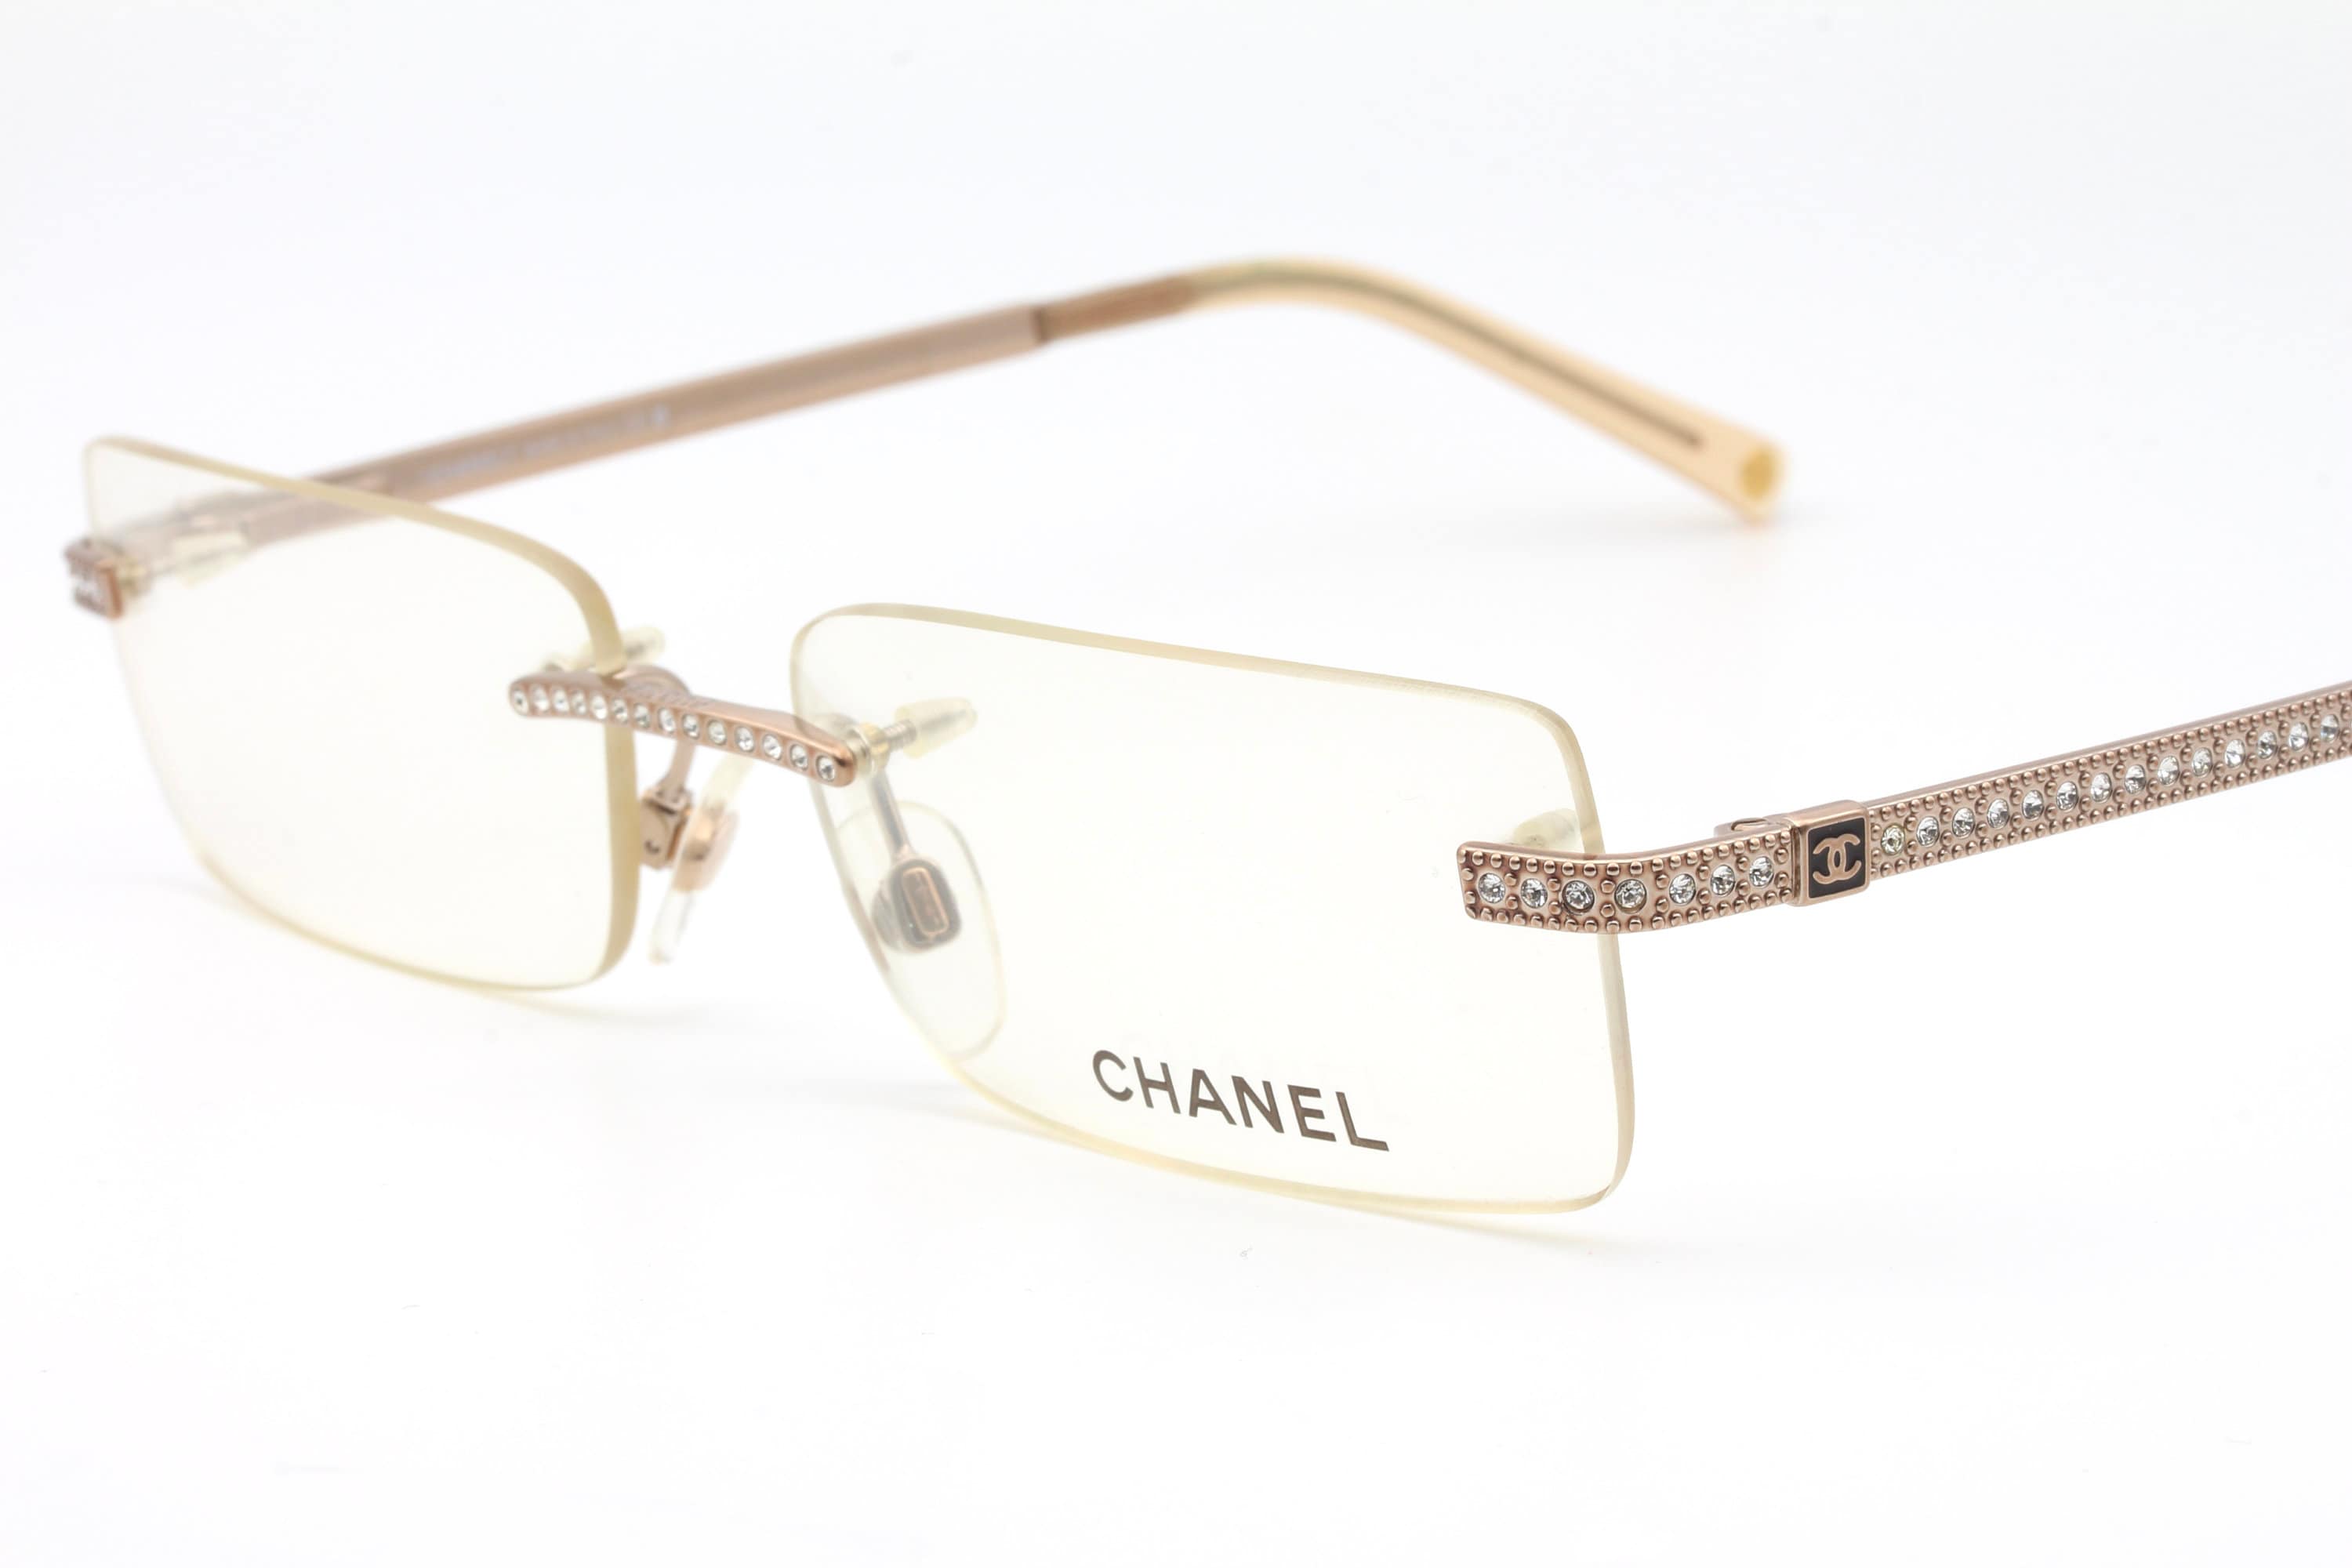 Chanel 3001 Vintage Eyeglasses Made in Italy 2000's New 